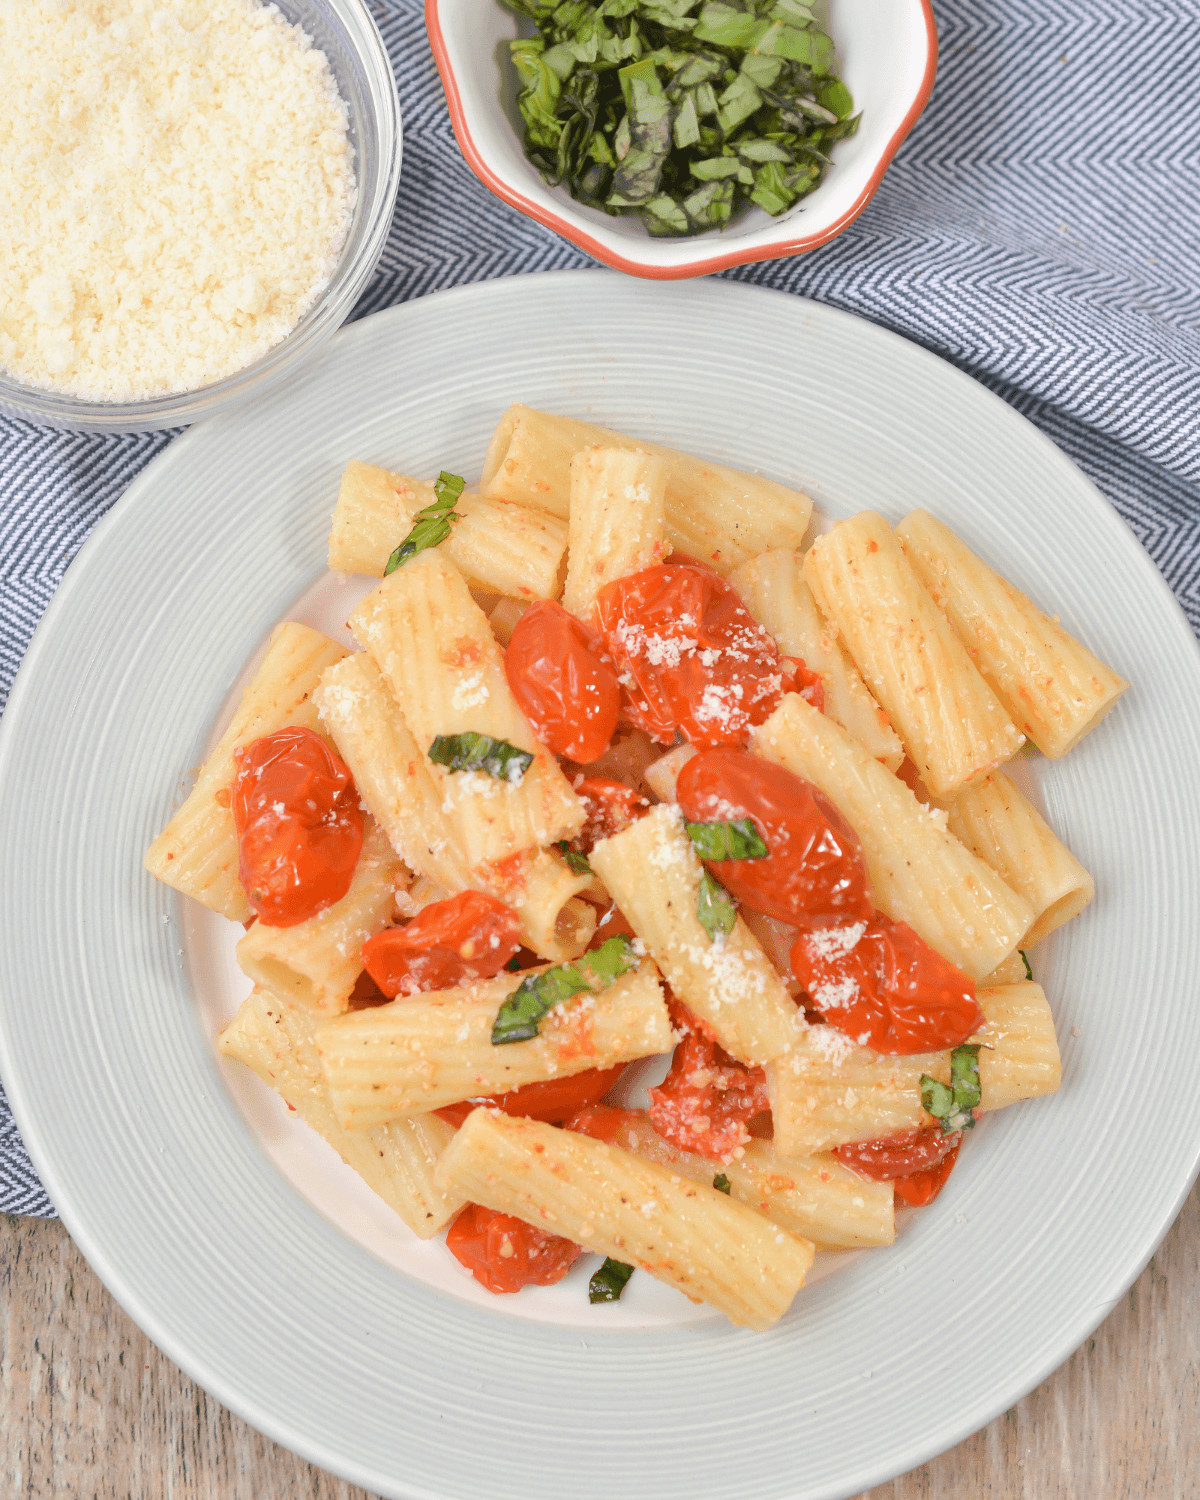 Slow-roasted tomato basil pasta served on a white plate with additional cheese and basil on the side.